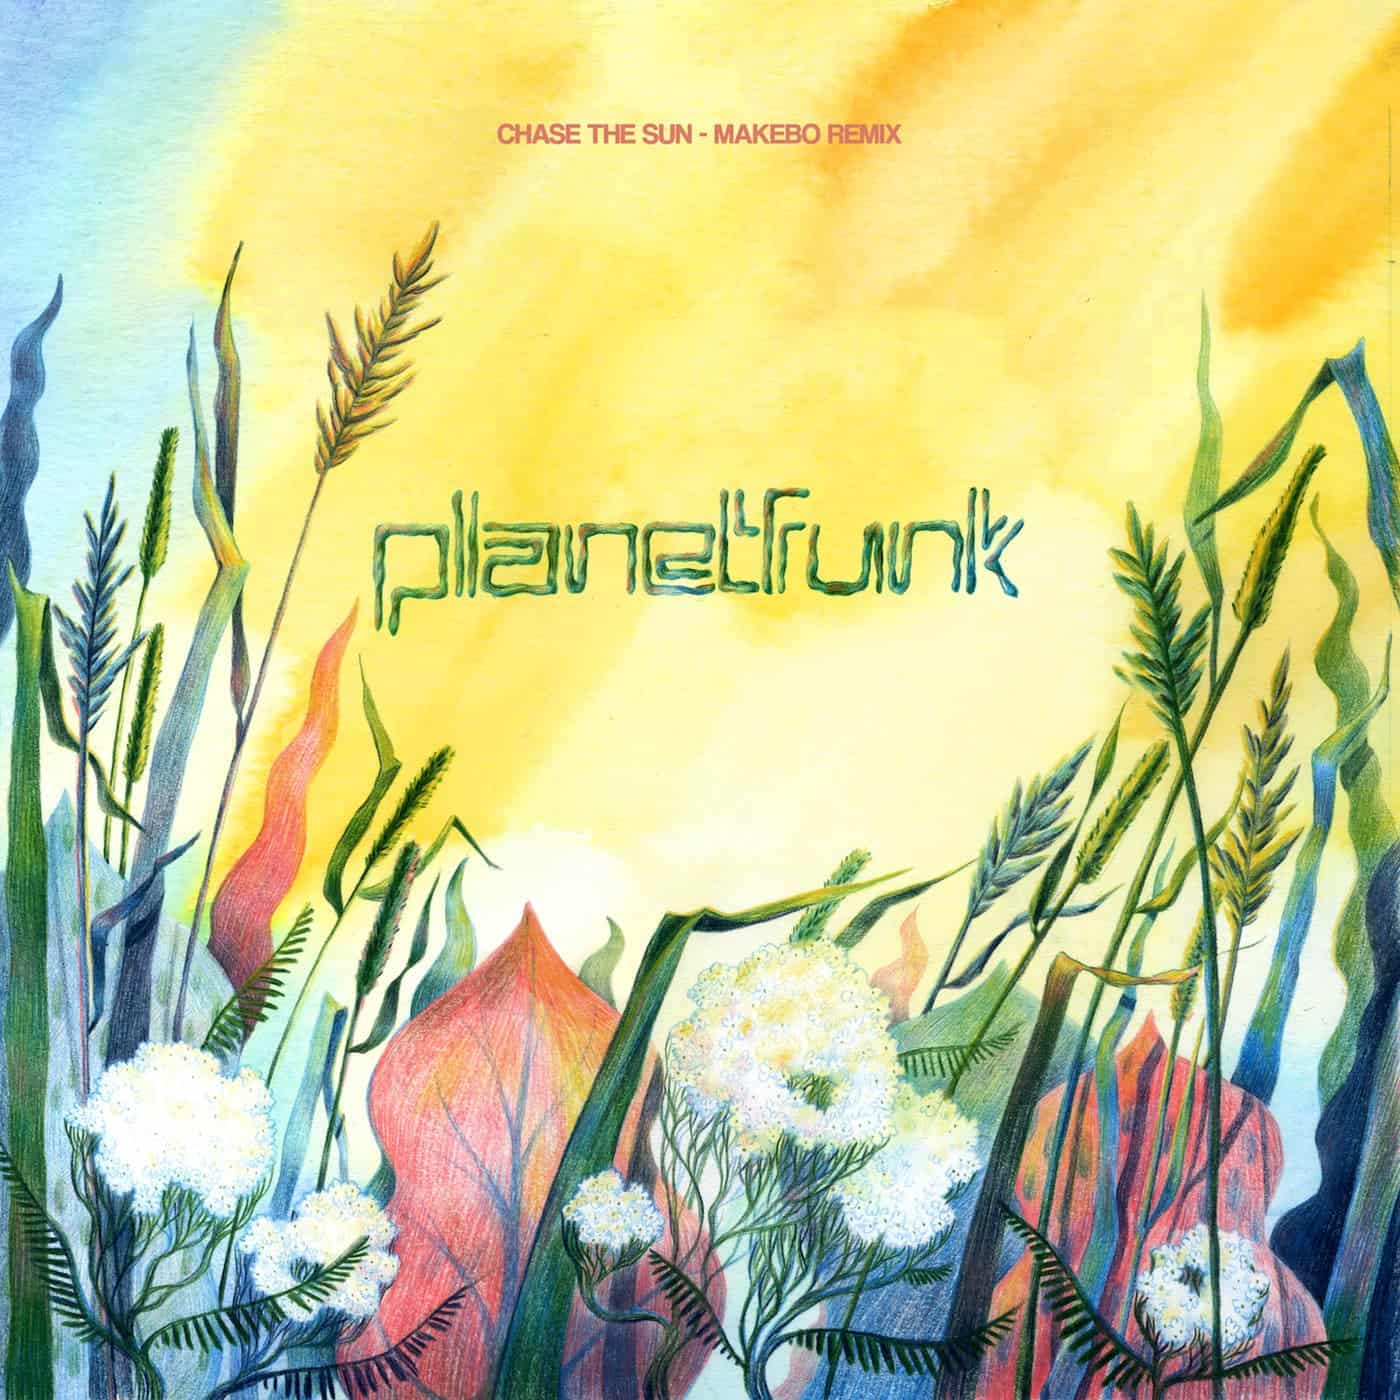 Download Planet Funk, Makebo - Chase The Sun - Makebo Remix on Electrobuzz